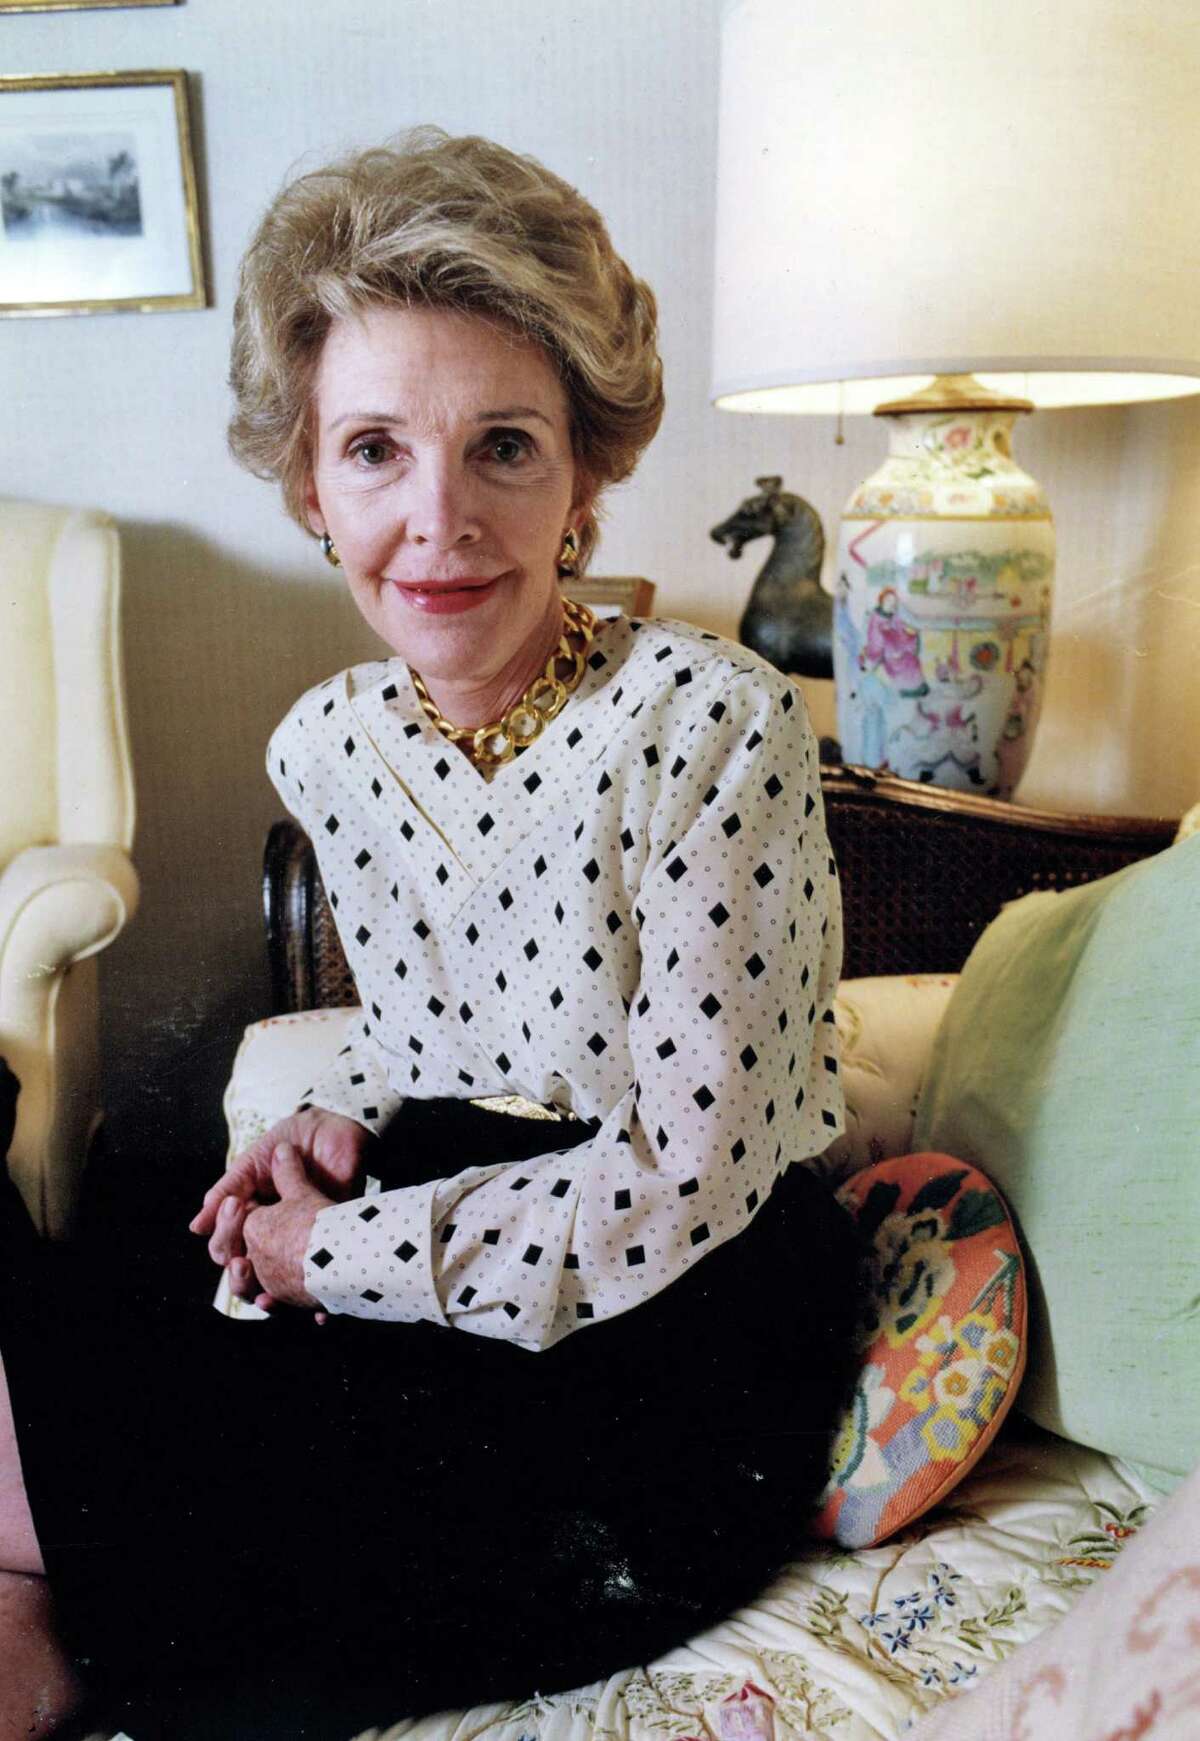 Former first lady Nancy Reagan, shown in 1989 at her office in Los Angeles, died of heart failure on Sunday at age 94 in Los Angeles.